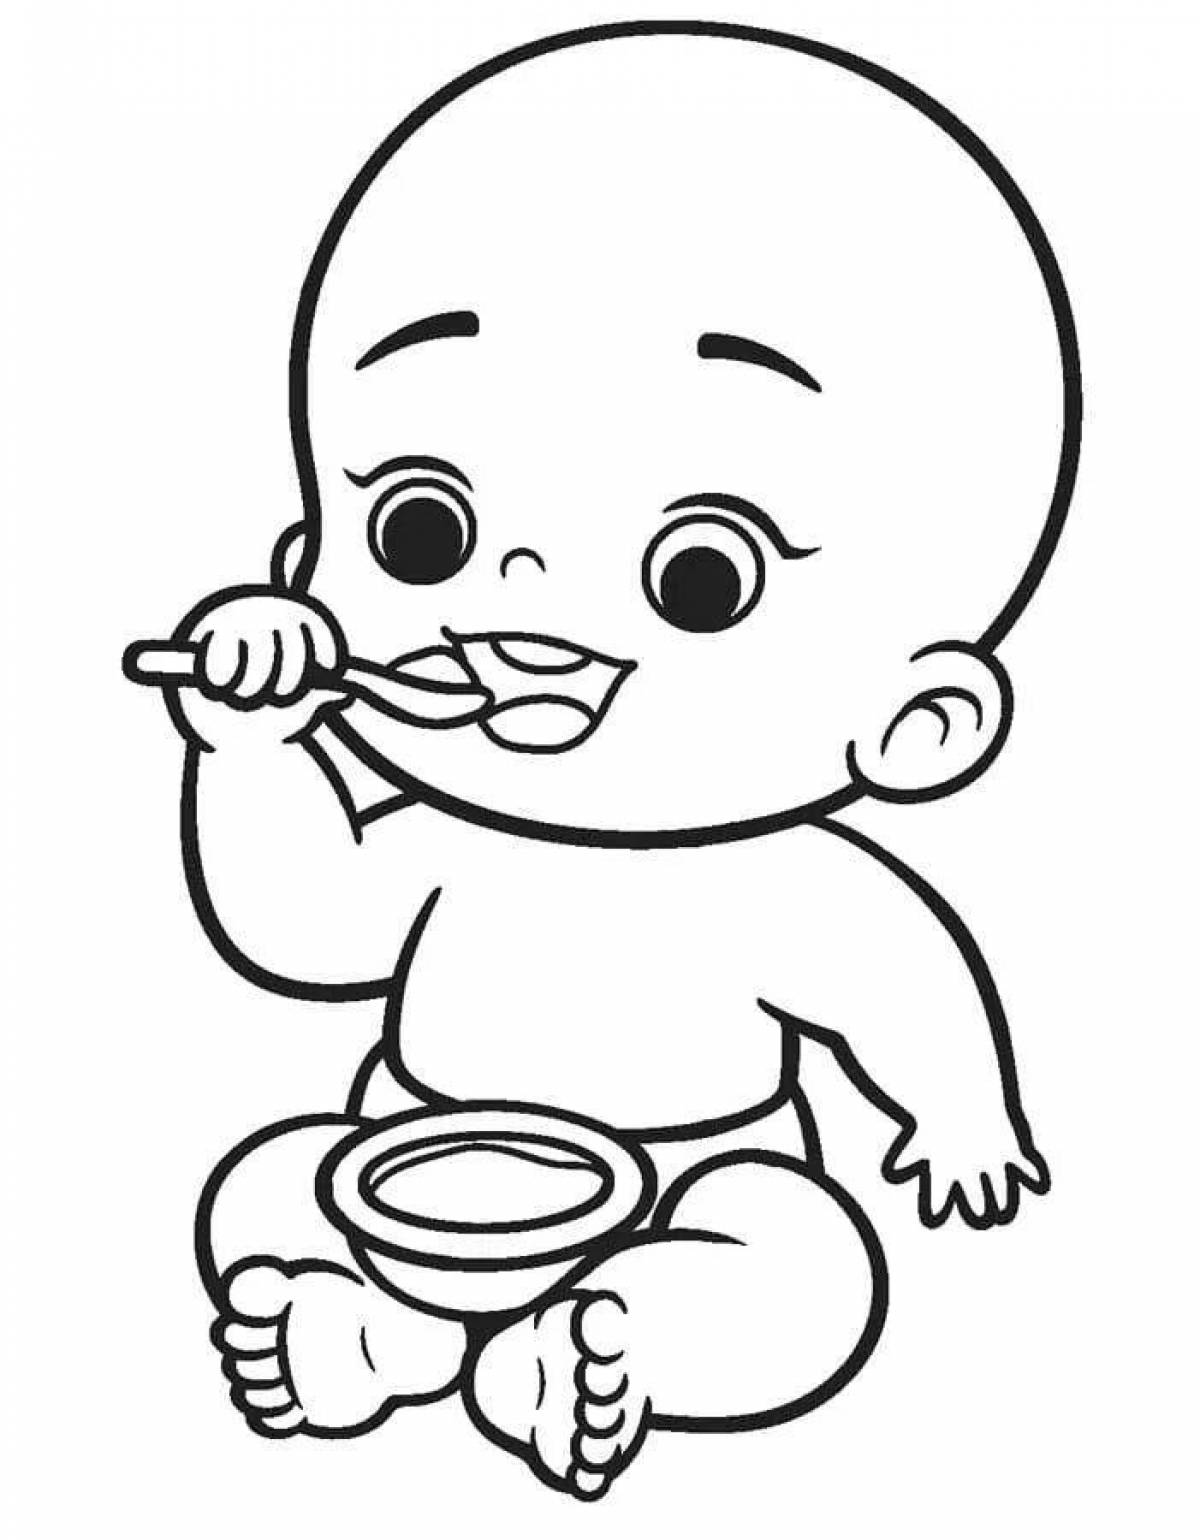 Charan baby's fancy coloring book